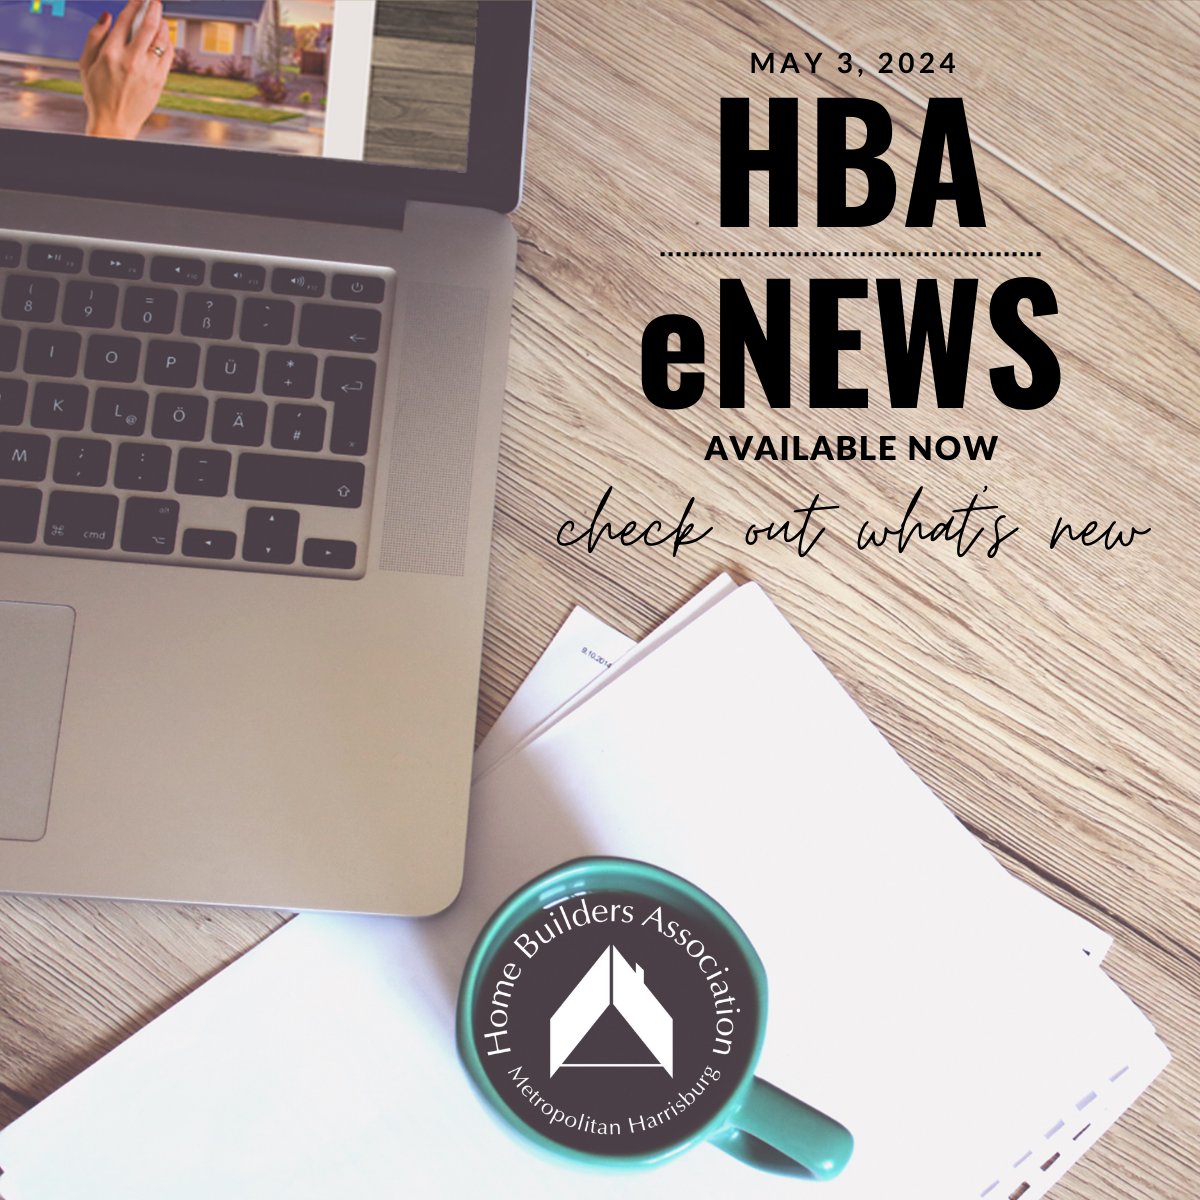 It's National Remodeler Month!
Check out what else is new in this week's eNews
conta.cc/3wgwEXi

#harrisburgbuilders #harrisburghba #weeklyupdate #eNews